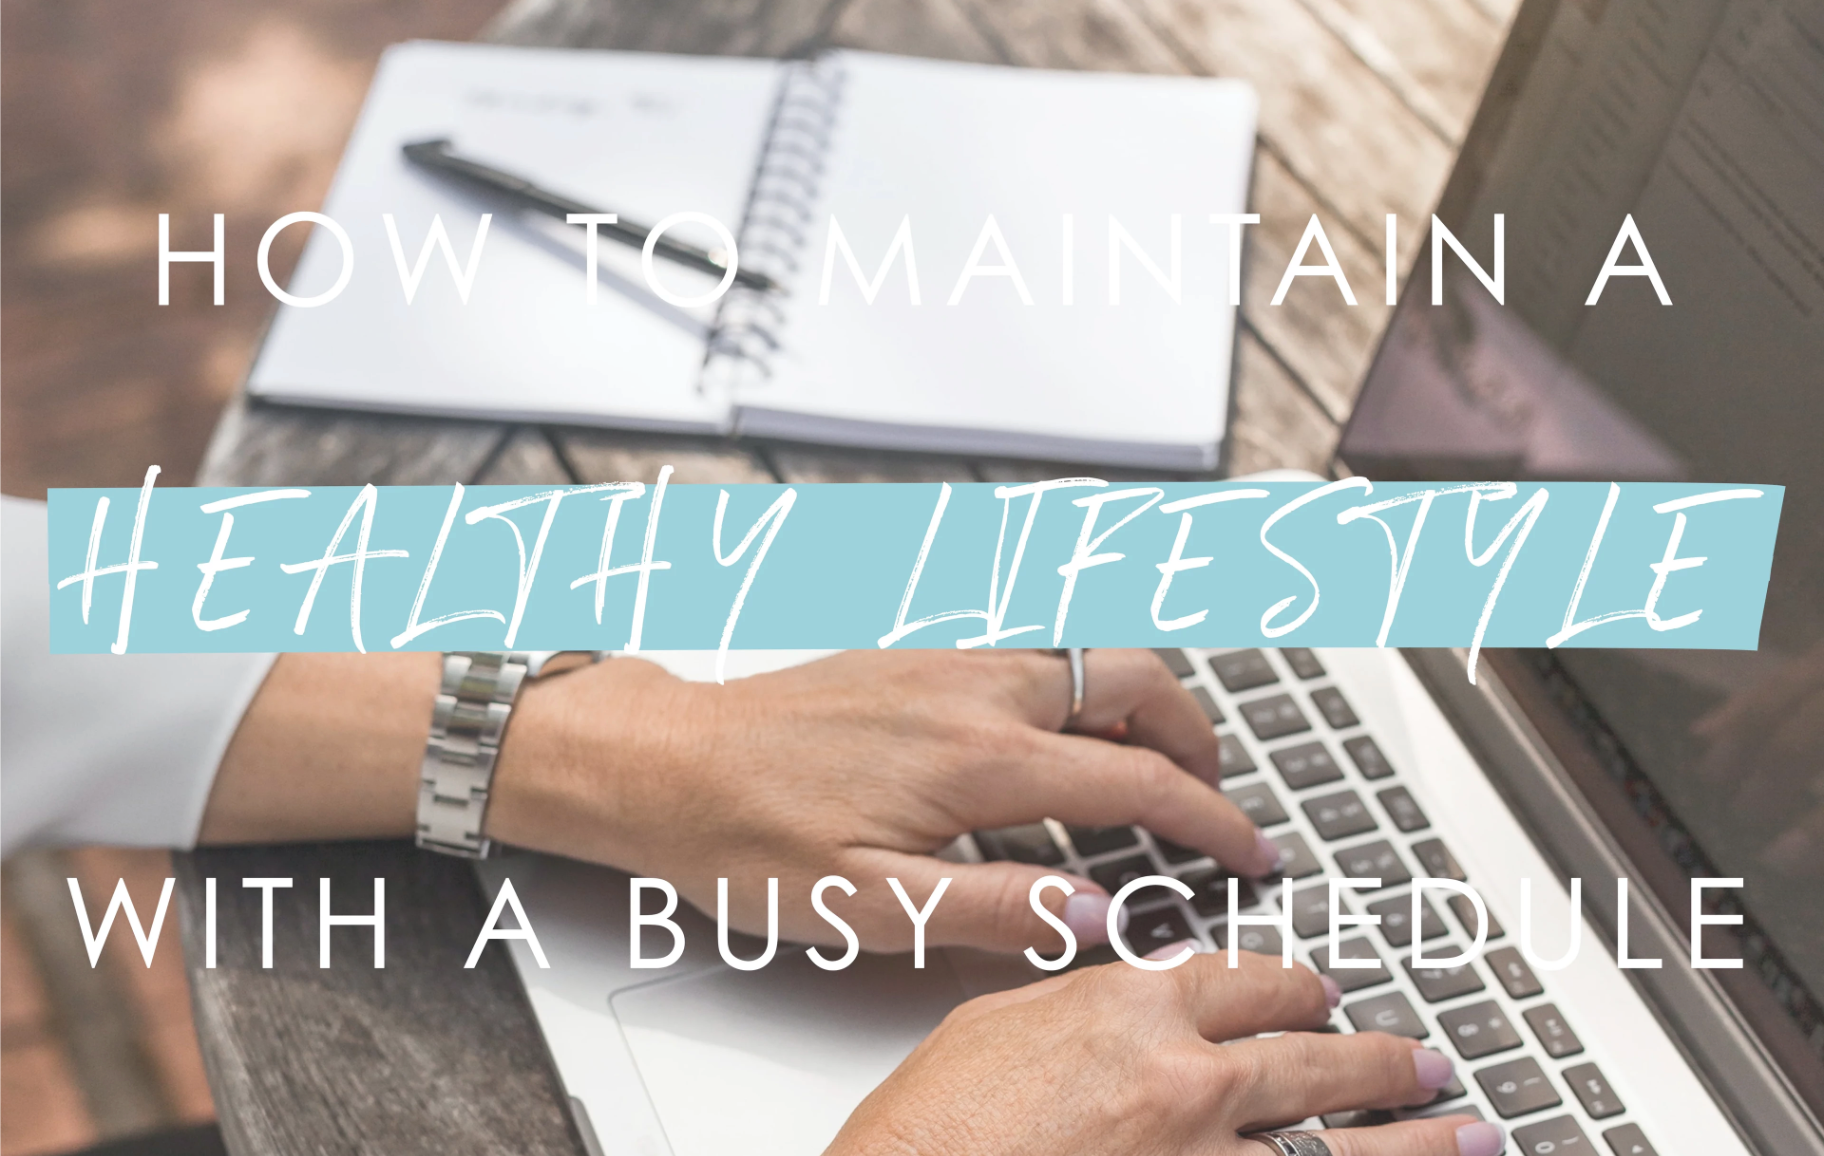 How to Keep a Healthy Lifestyle With a Busy Schedule